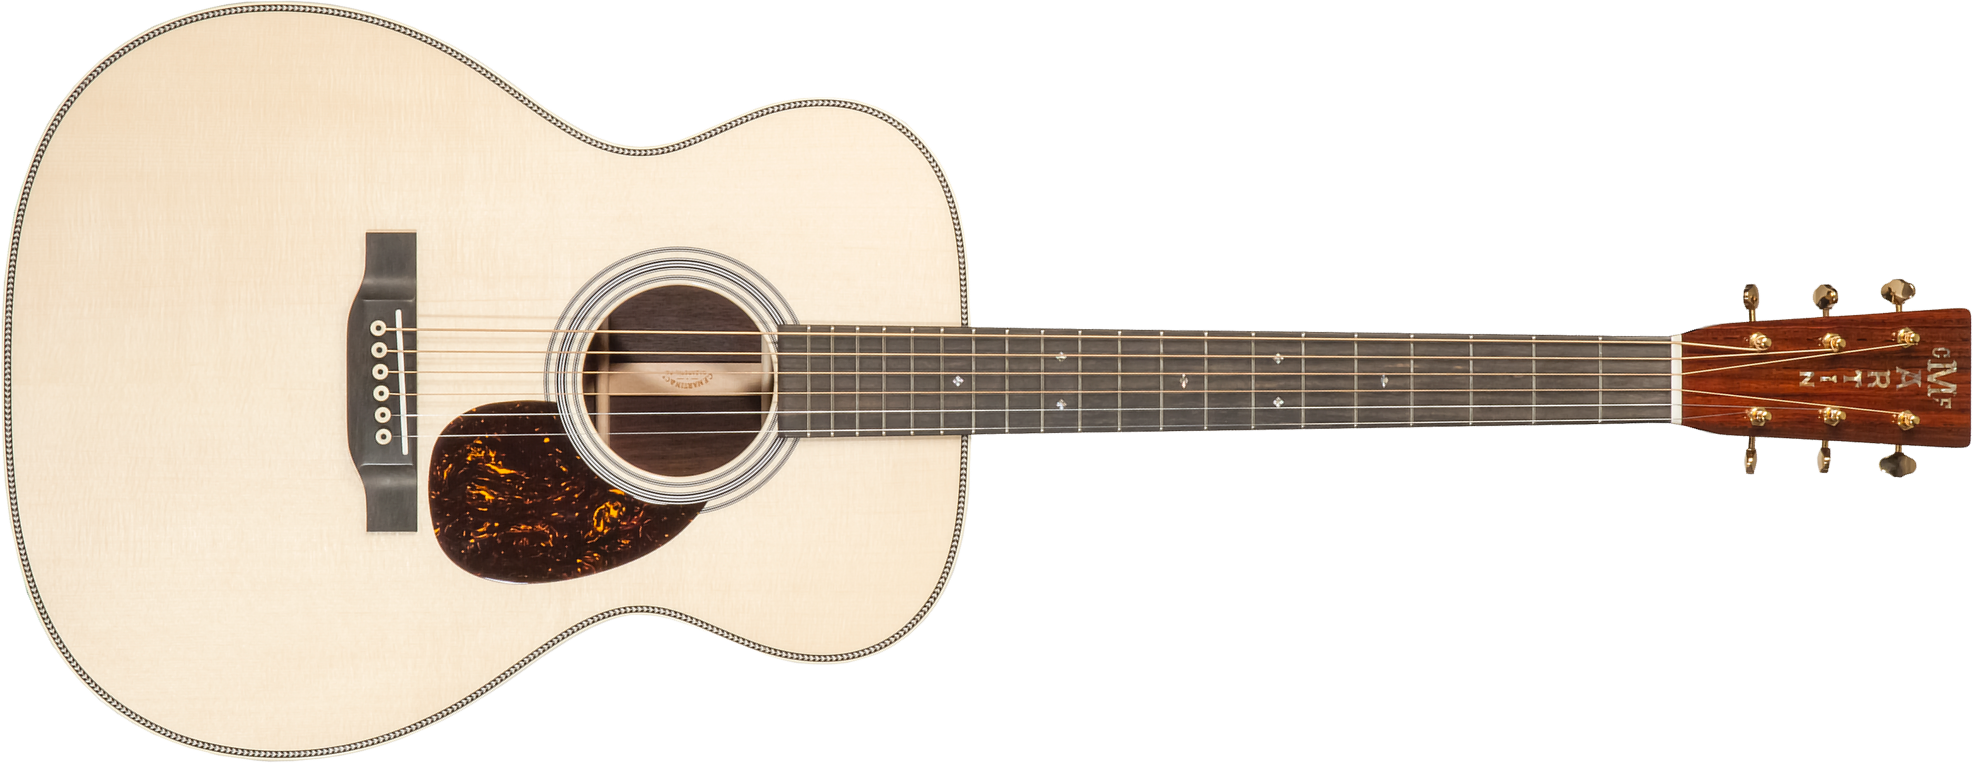 Martin Custom Shop Cs-om-c22025678 Orchestra Epicea Cocobolo Eb #2736832 - Natural Clear - Acoustic guitar & electro - Main picture